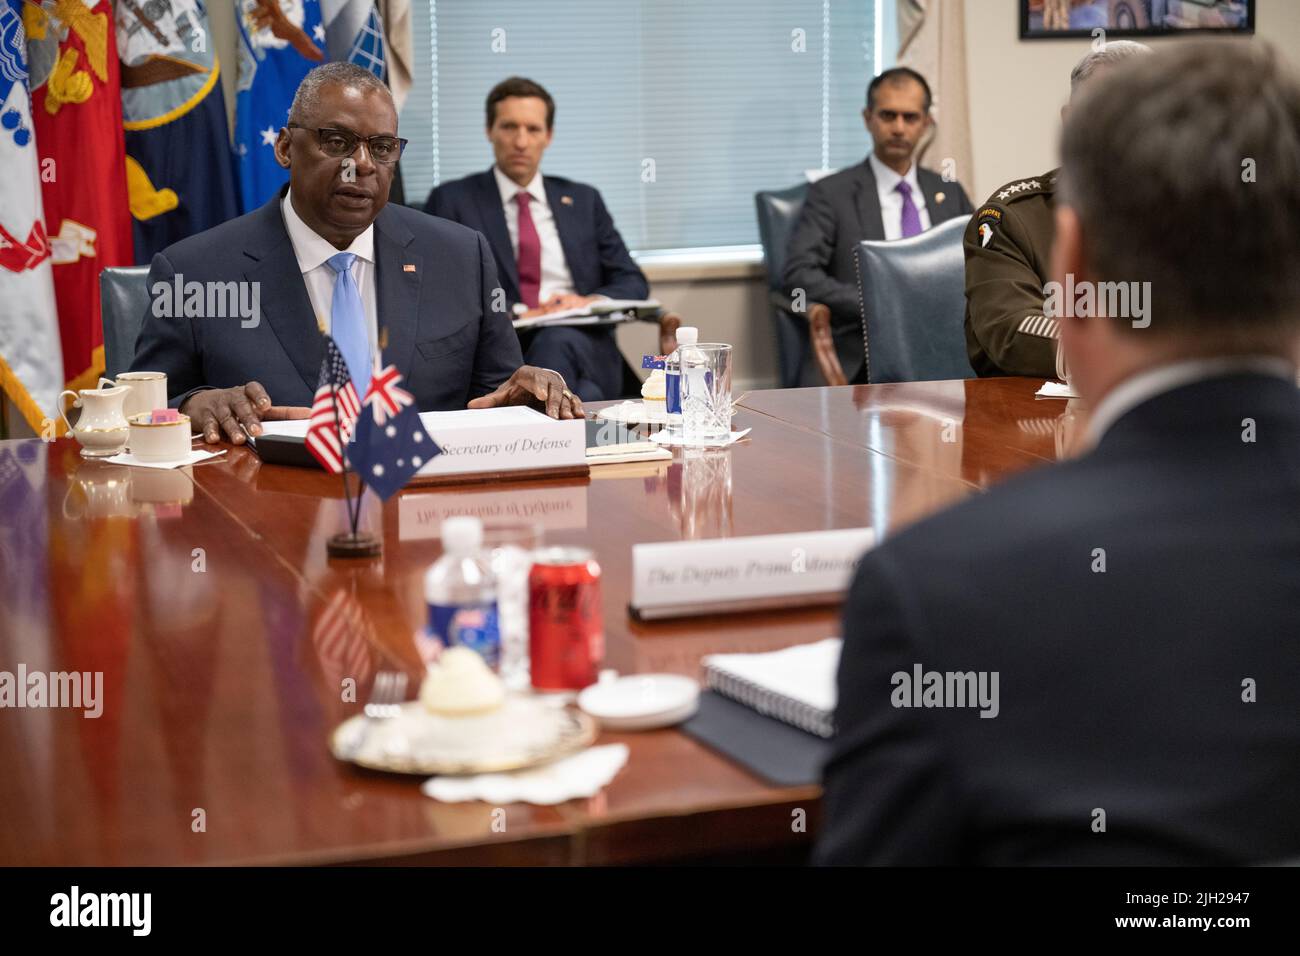 Arlington, United States Of America. 13th July, 2022. Arlington, United States of America. 13 July, 2022. U.S. Secretary of Defense Lloyd J. Austin III, left, during a face-to-face bilateral meeting with Australian Deputy Prime Minister and Defense Minister Richard Marles, right, at the Pentagon, July 13, 2022 in Arlington, Virginia. Credit: Lisa Ferdinando/DOD/Alamy Live News Stock Photo